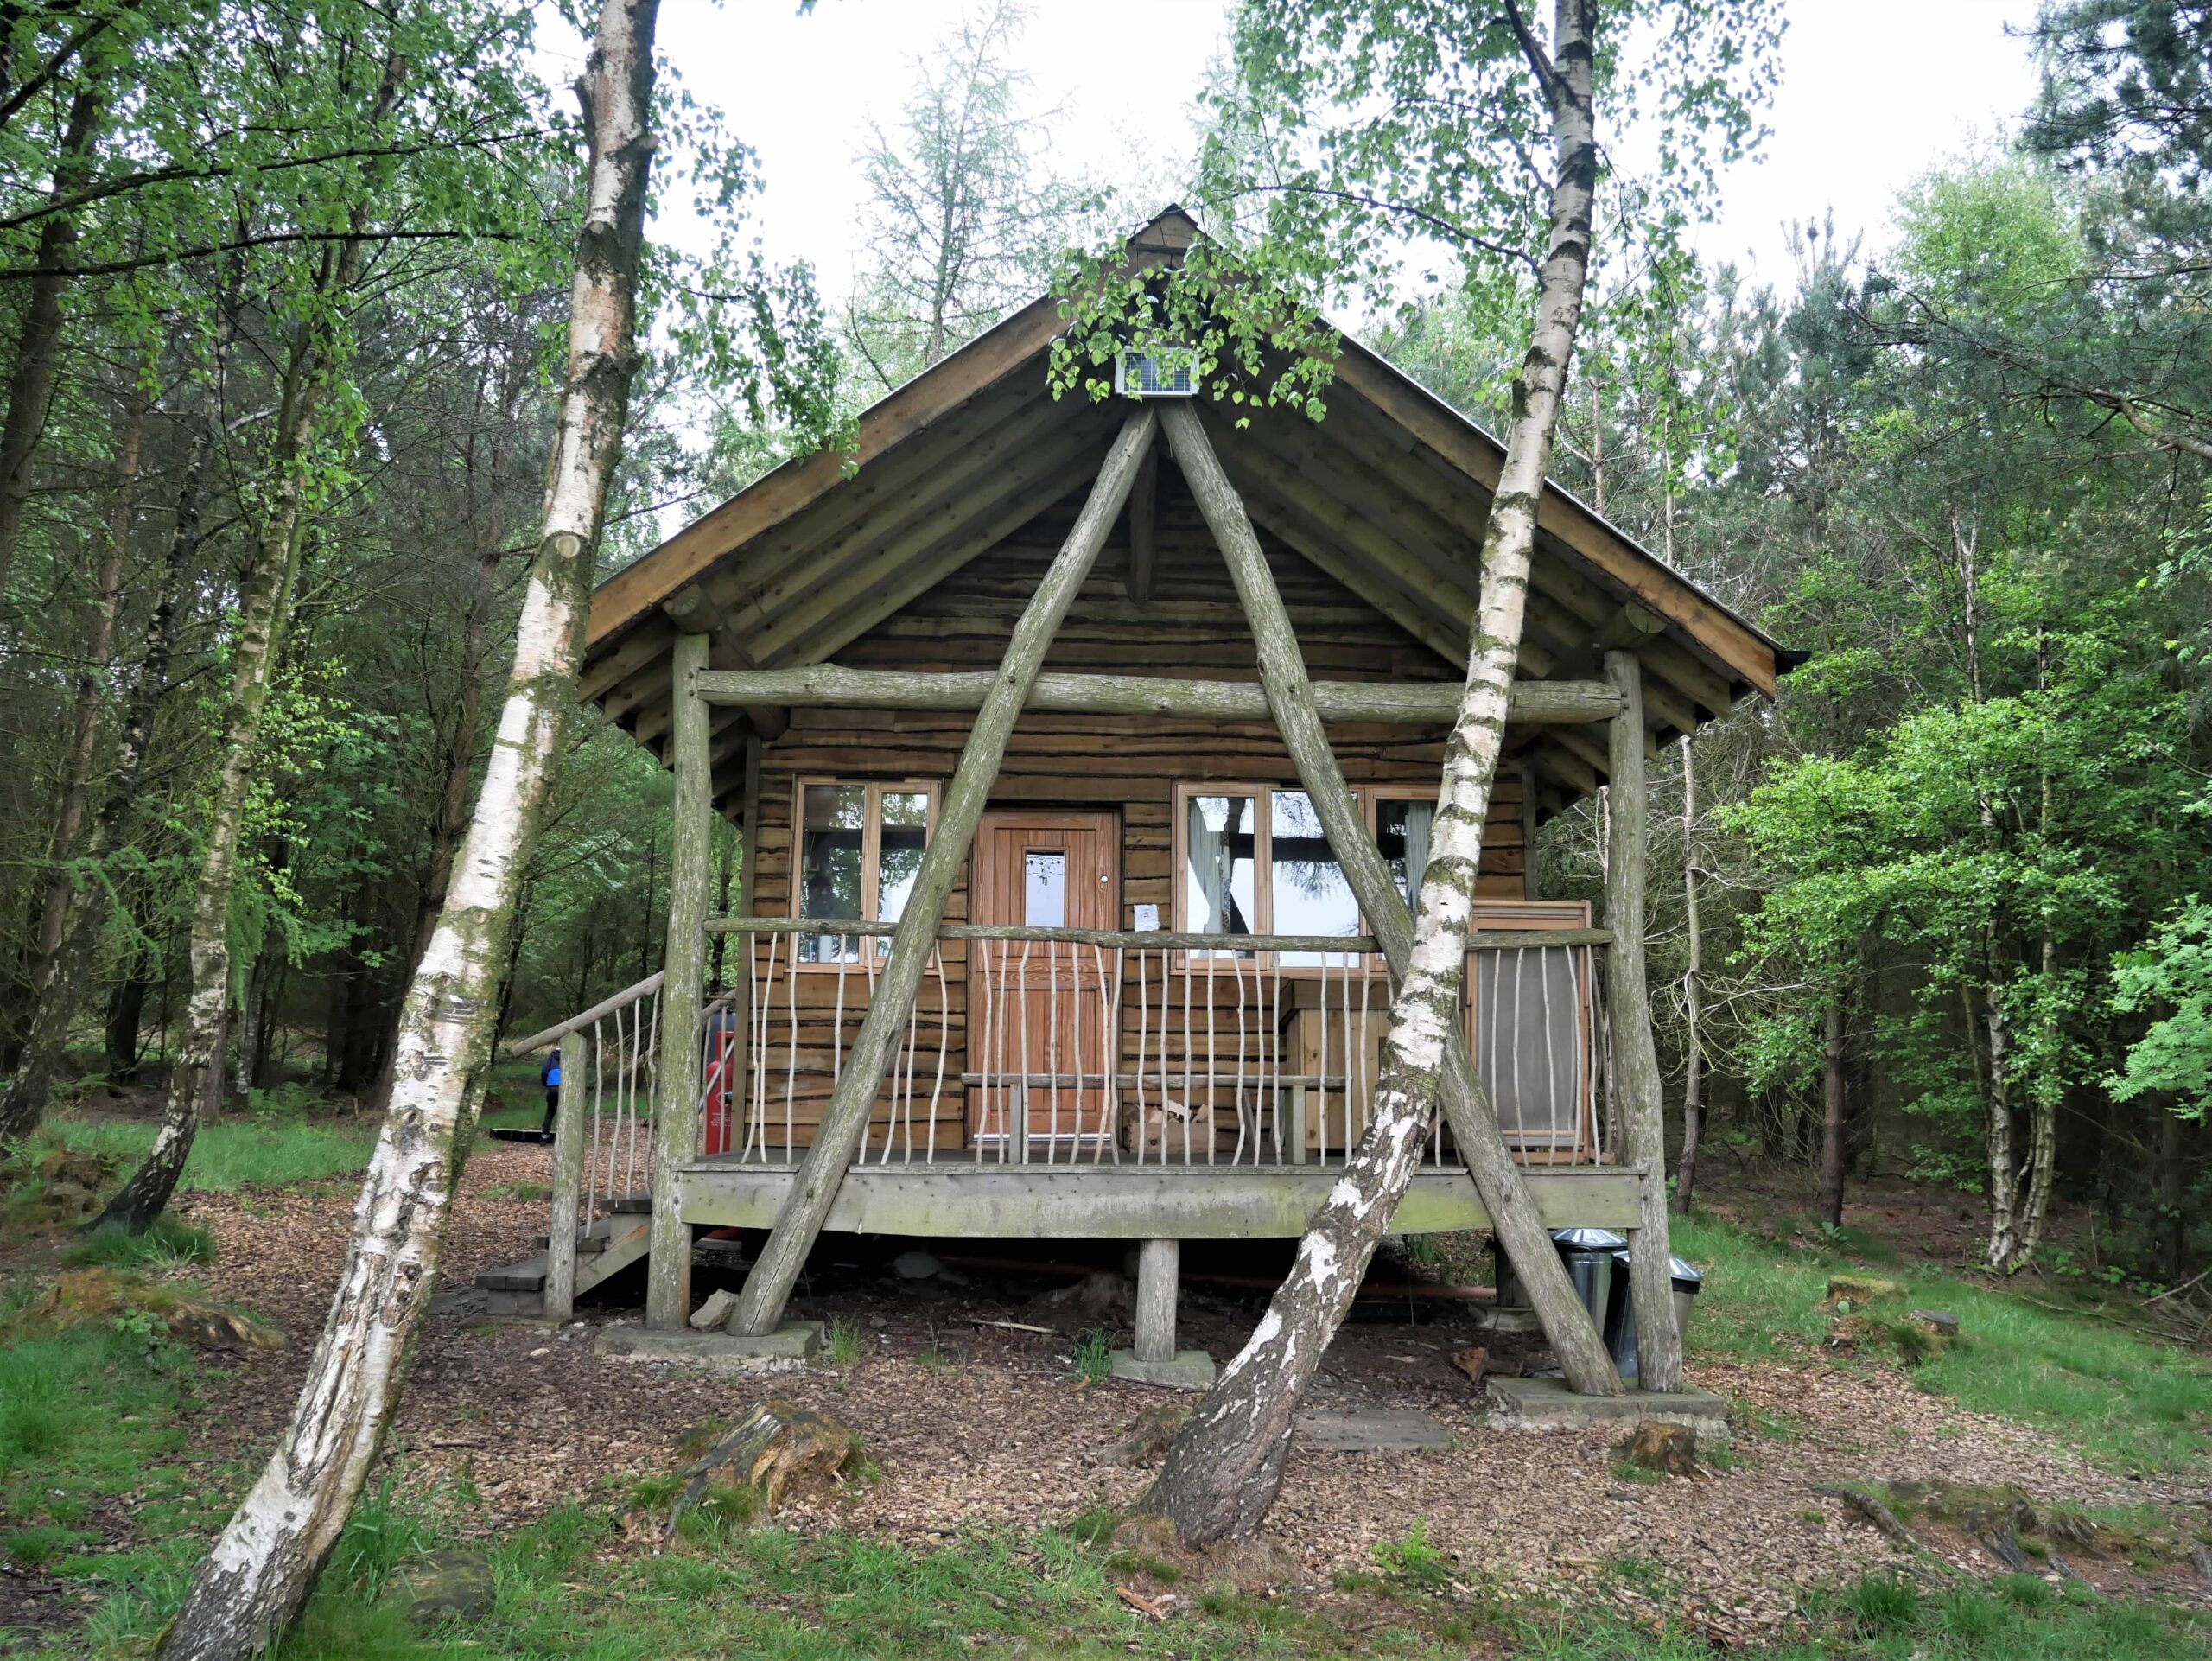 Swinton Bivouac A Magical Tree Lodge Stay | Posh Glamping in North Yorkshire